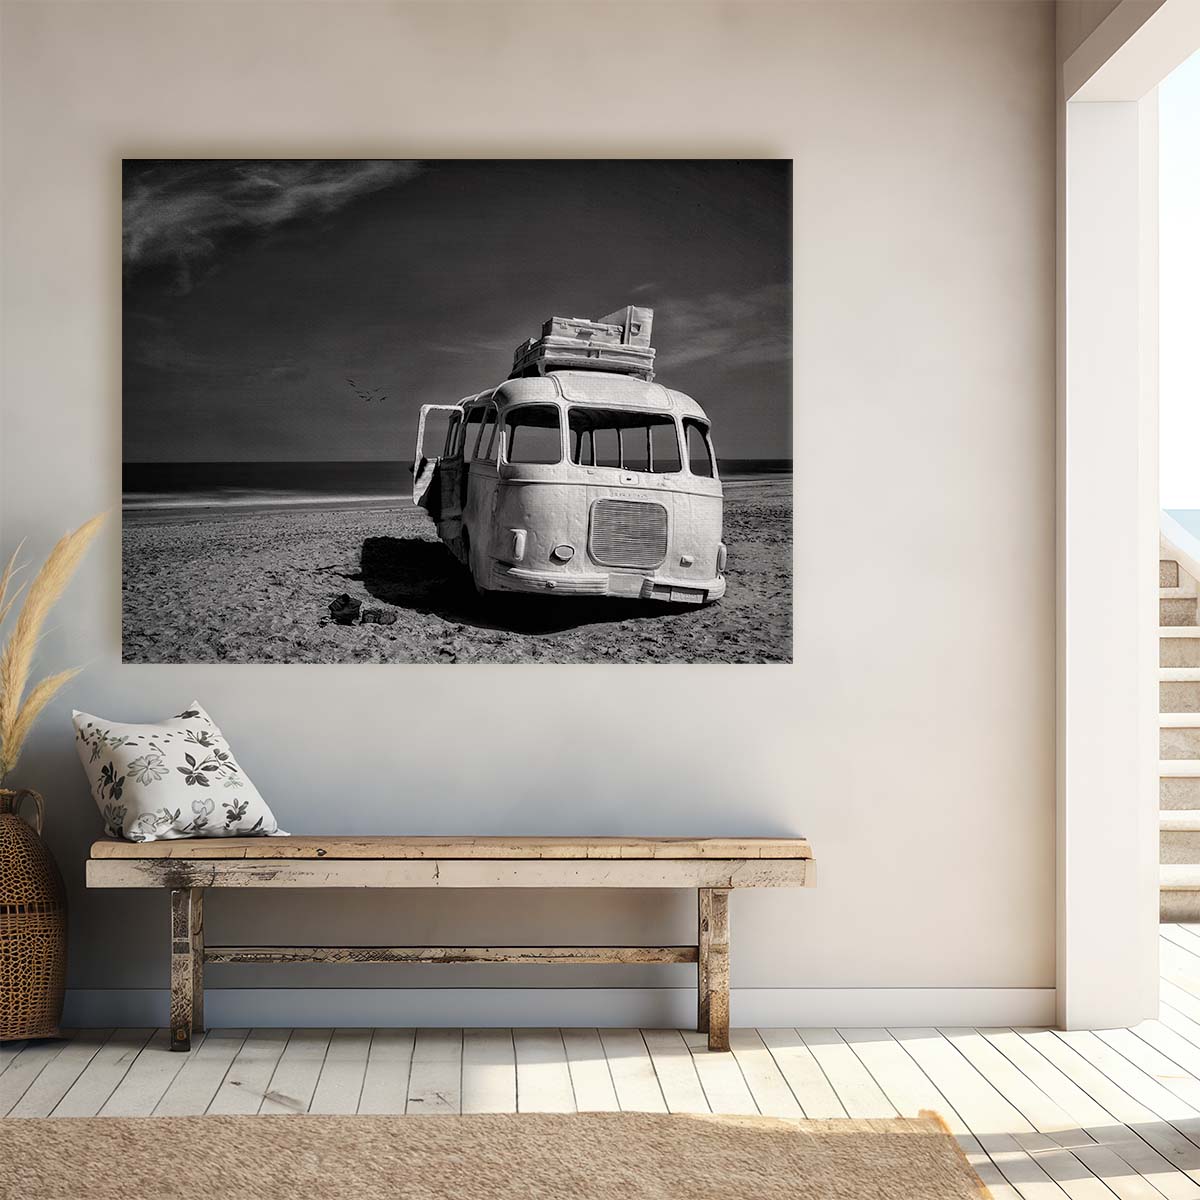 Stranded Bus on Belgian Beach BW Wall Art by Luxuriance Designs. Made in USA.